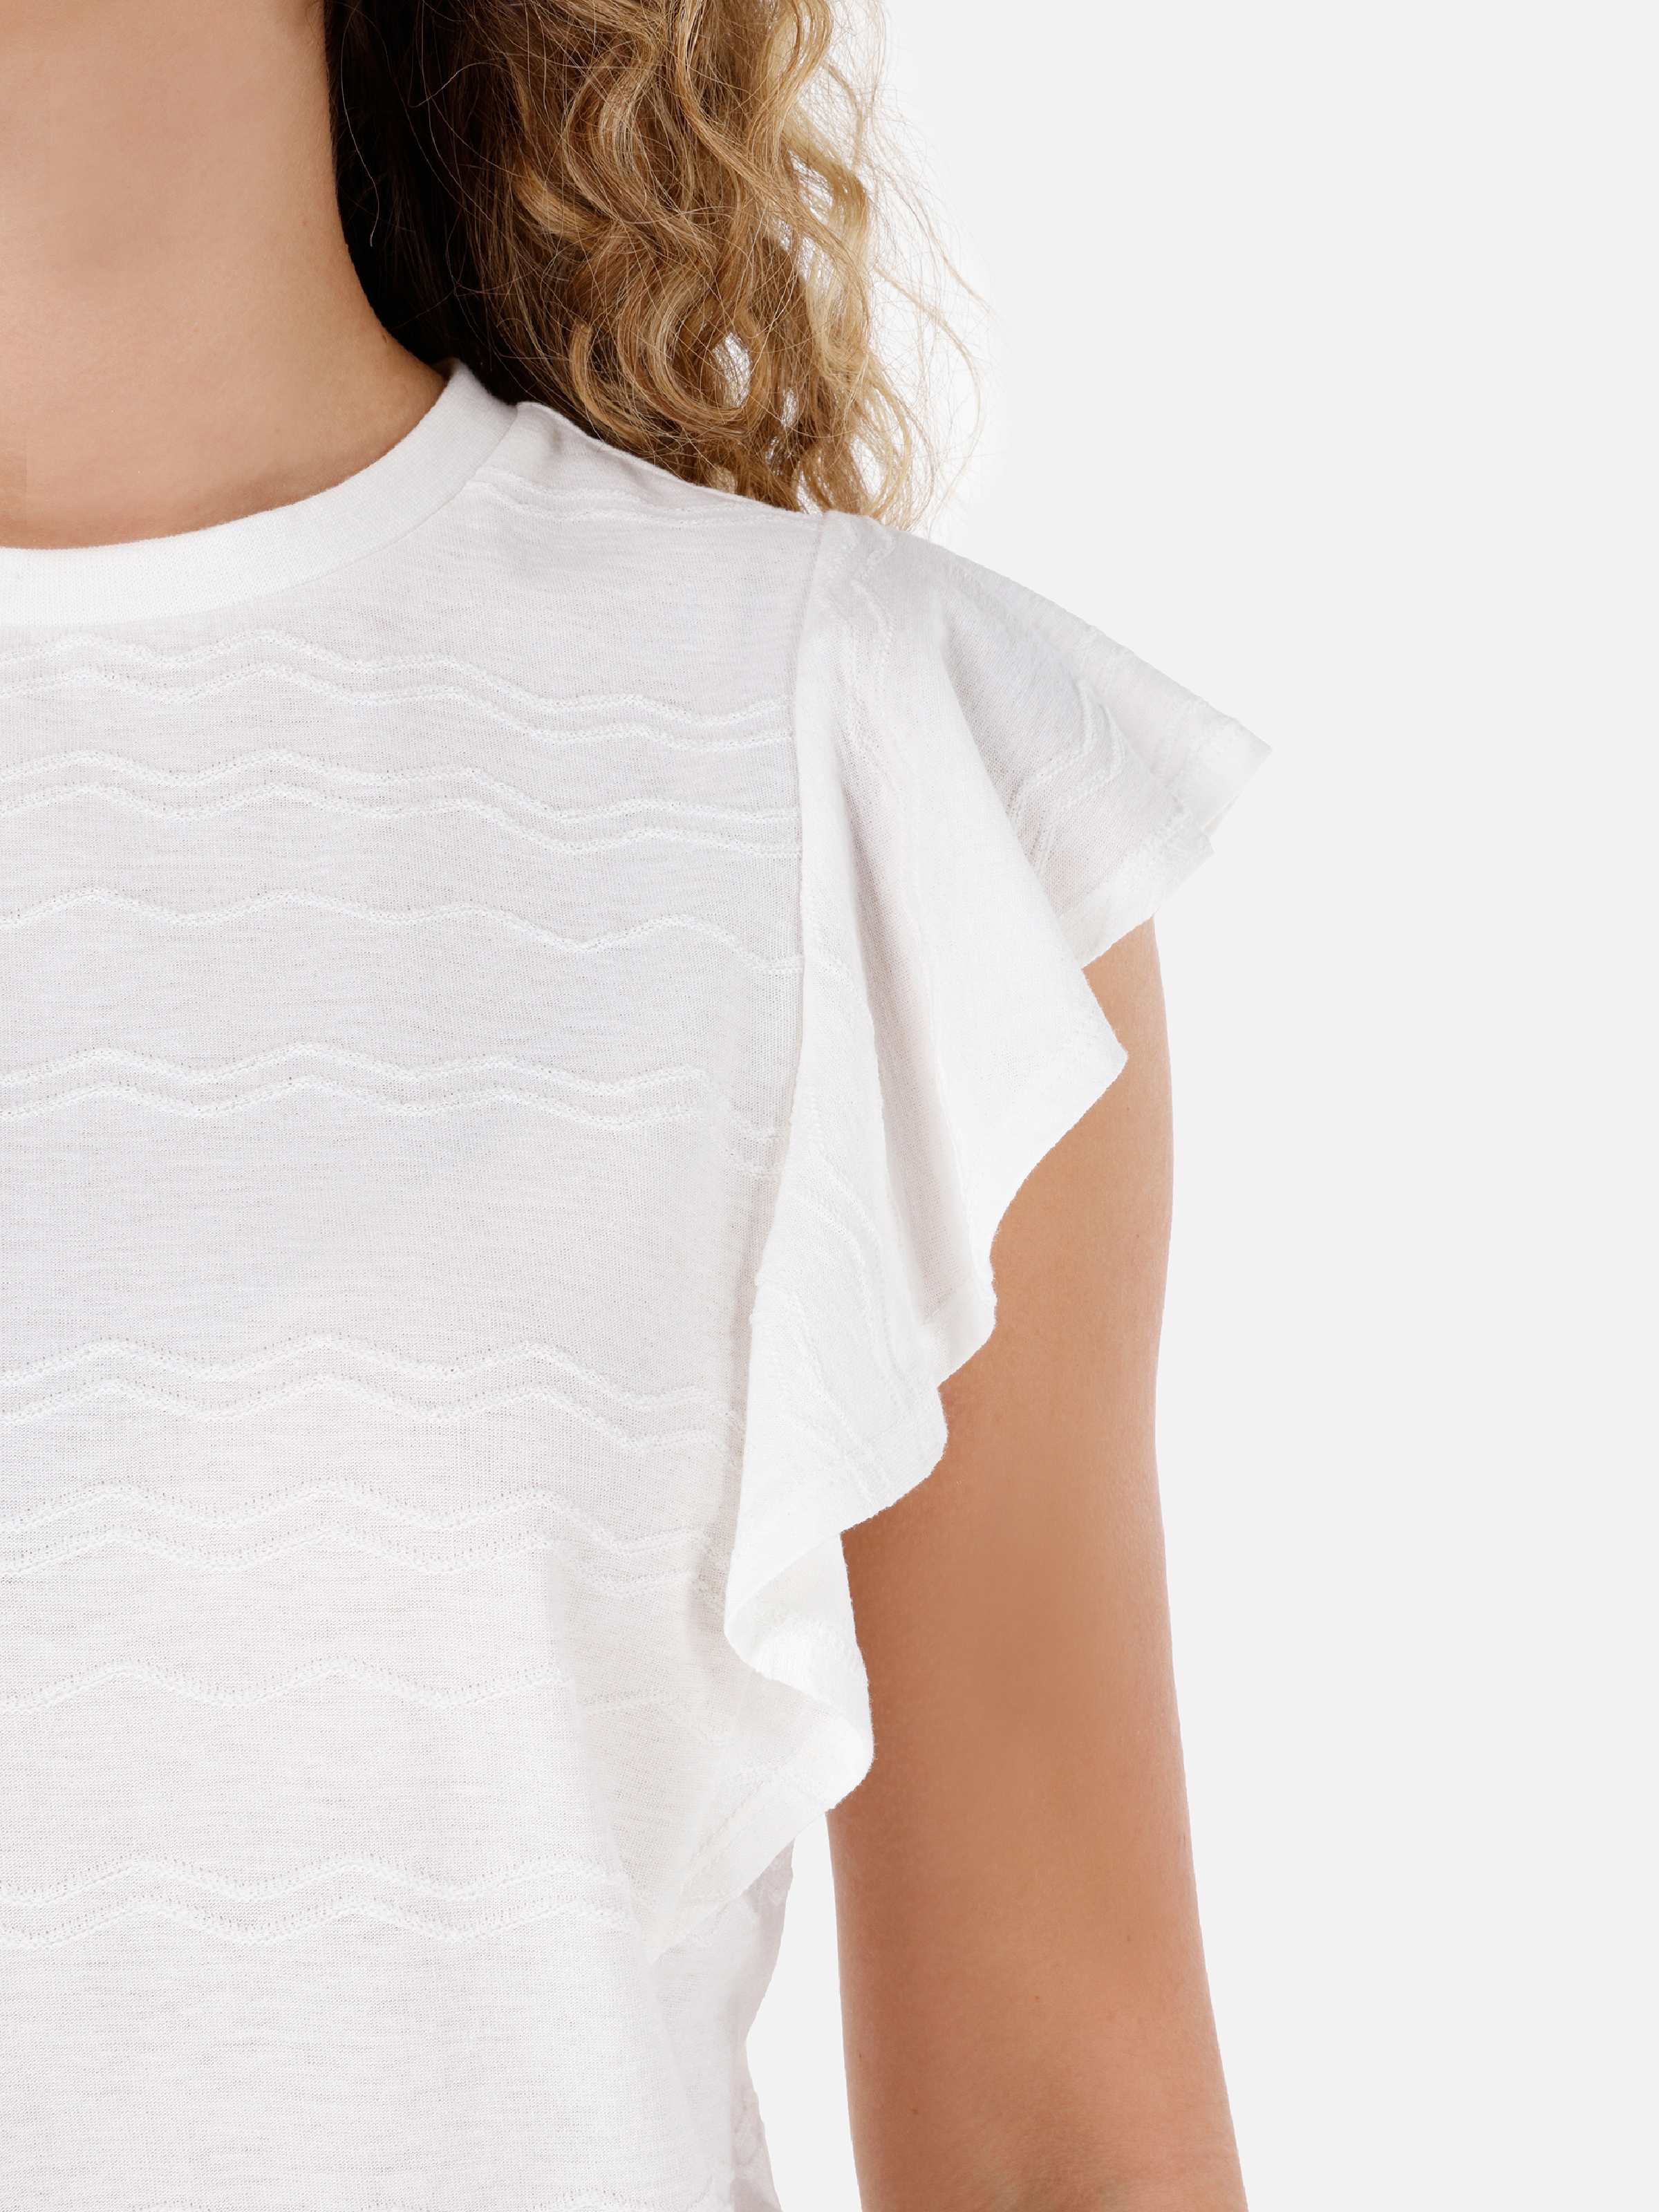 Show details for Whıte Woman Short Sleeve Tshirt